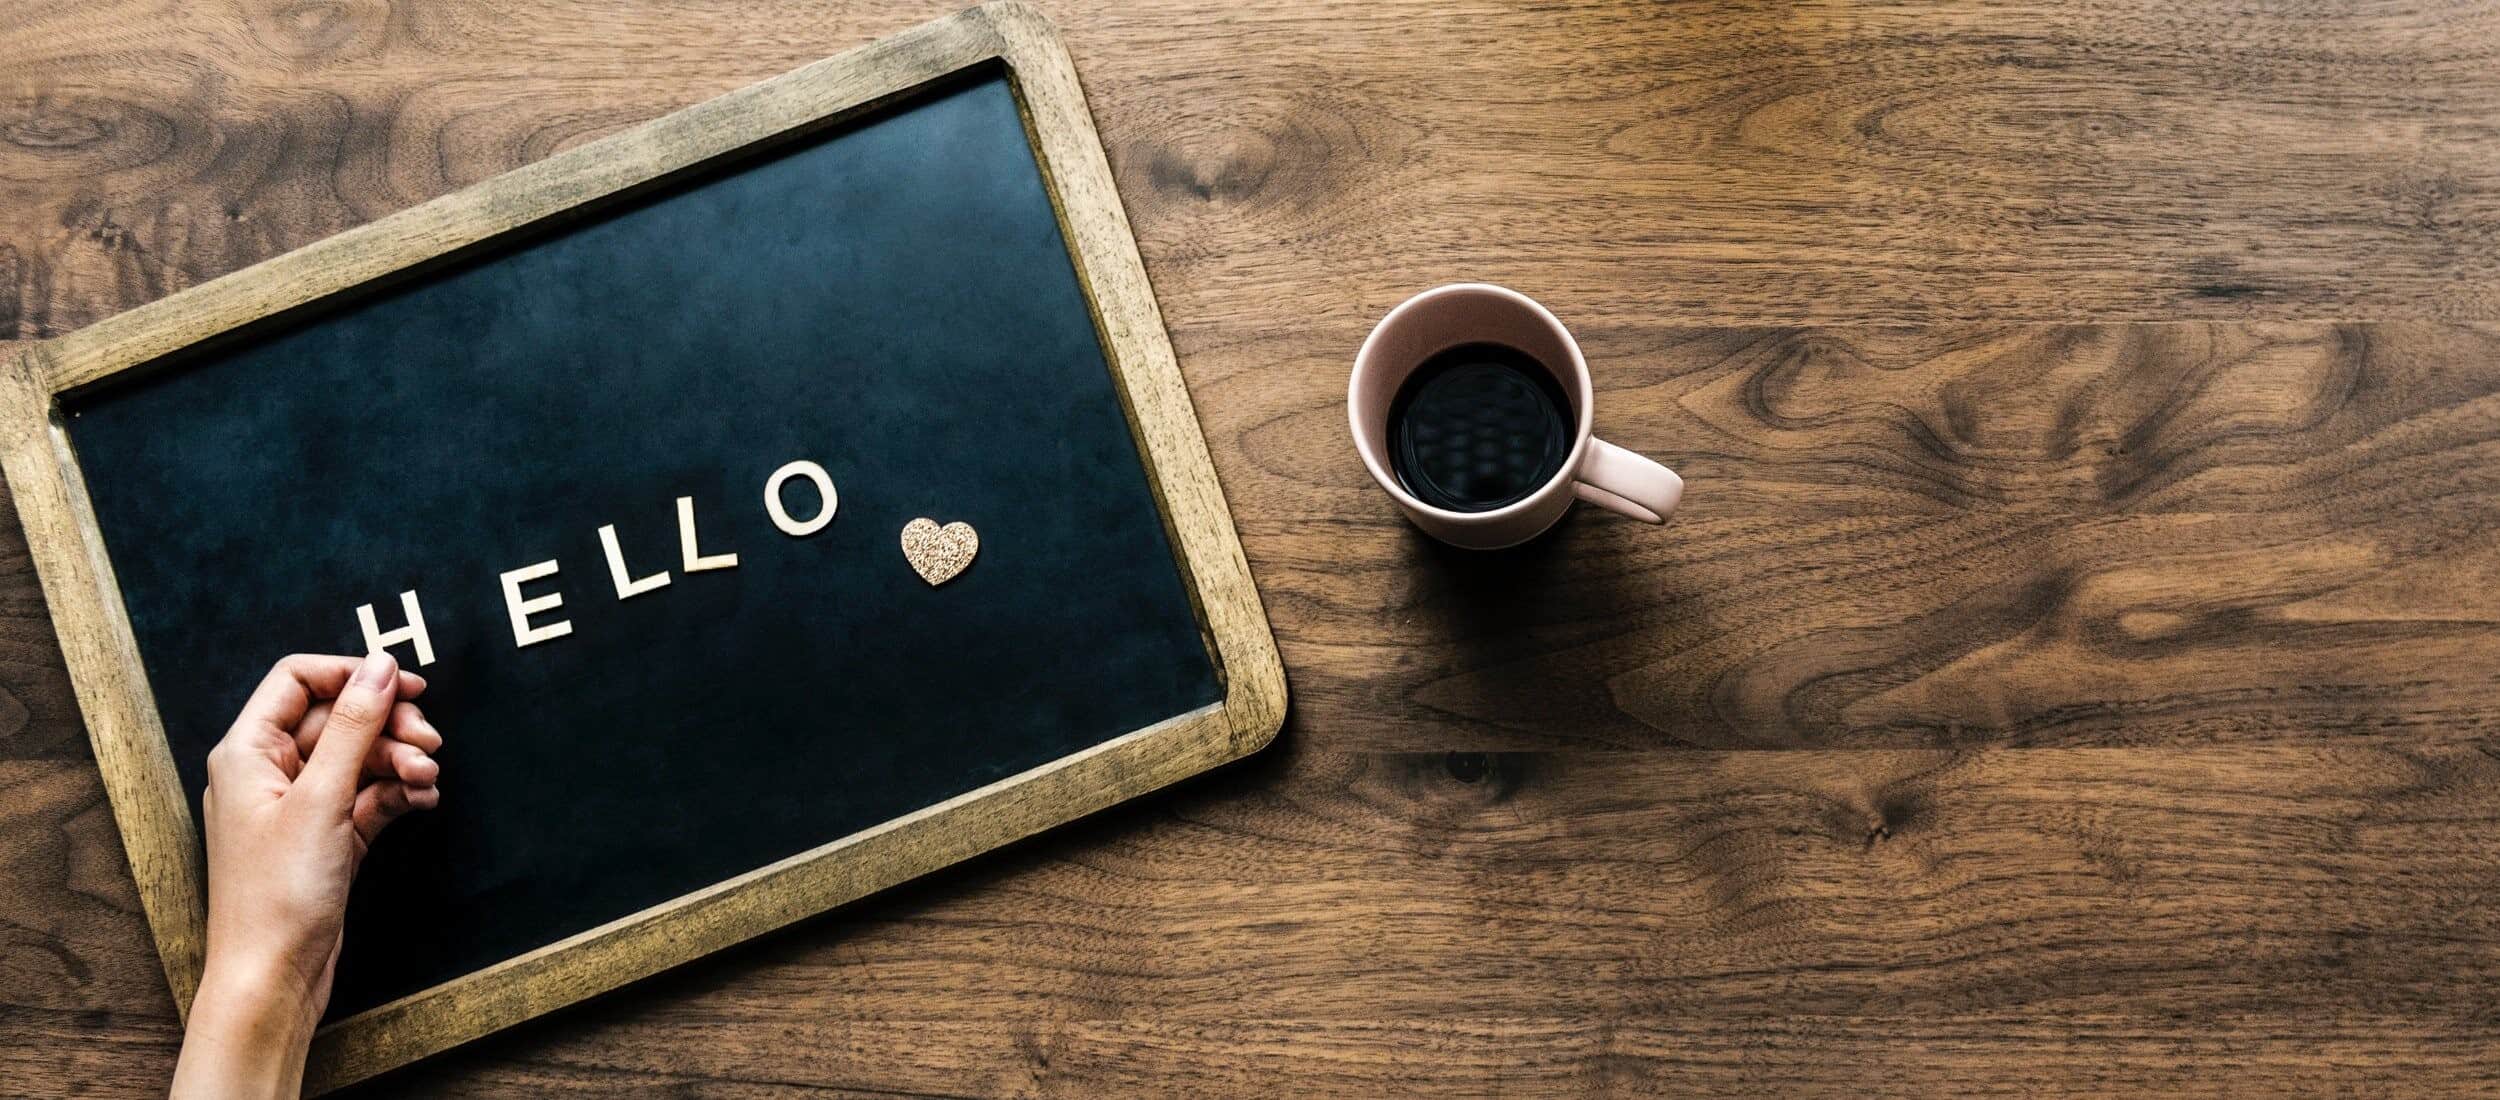 A person's hand arranging letter tiles spelling 'hello' on a chalkboard next to a heart symbol, with a cup of coffee on a wooden table, conveying a warm and welcoming message.